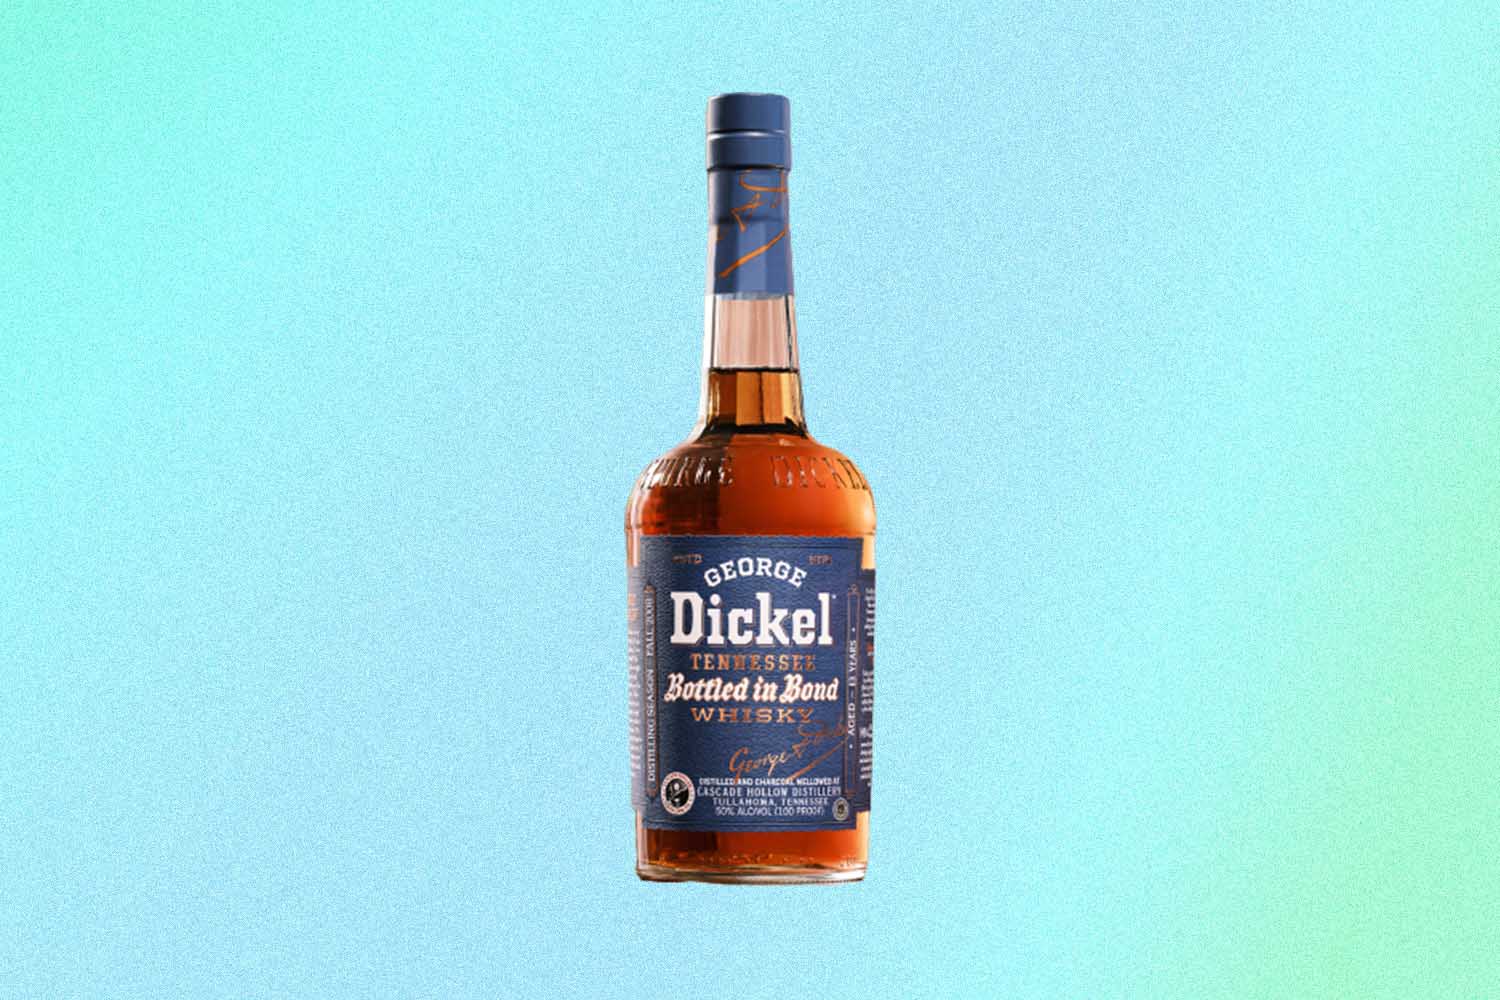 George Dickel Bottled in Bond Fall 2008, Aged 13 Years